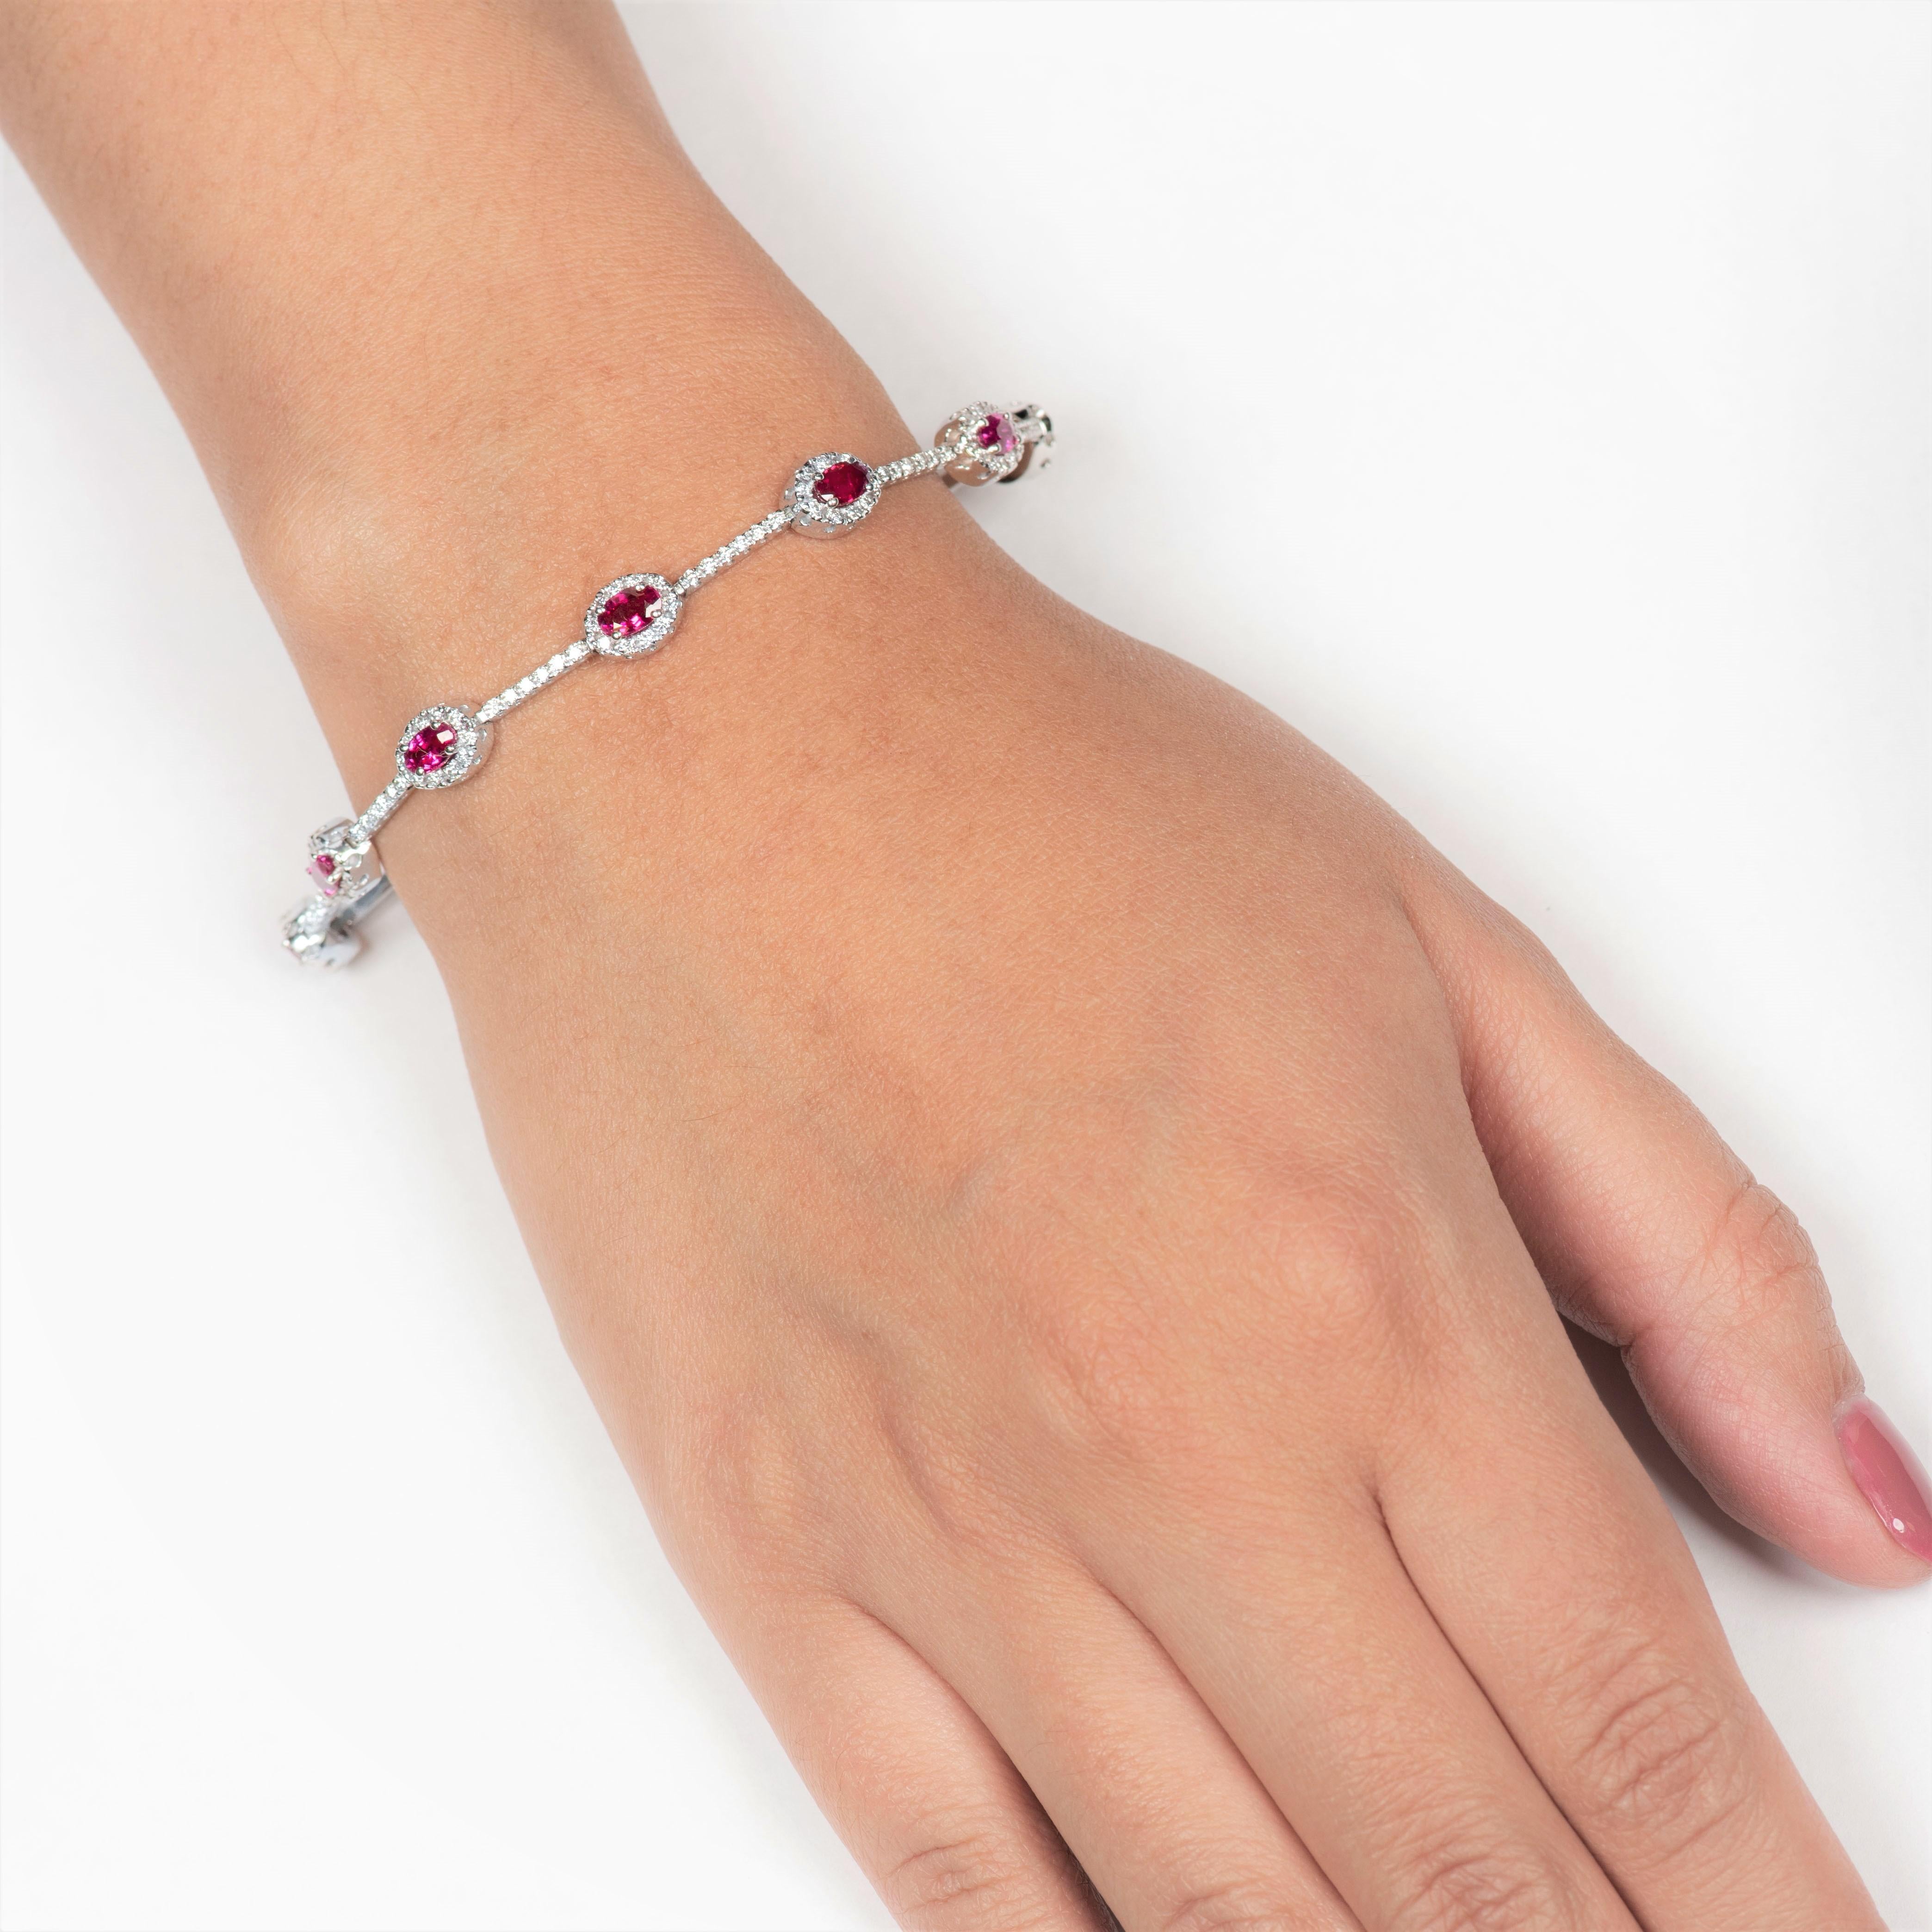 Elegant 2.31 carats of 10 perfectly matched oval cut Burma rubies encircled with 1.85 carats of round diamonds (180 diamonds). The bracelet measures 7 inches in length and is set in 14K white gold.

Diamond quality:  F-G color, VS2- SI1 clarity